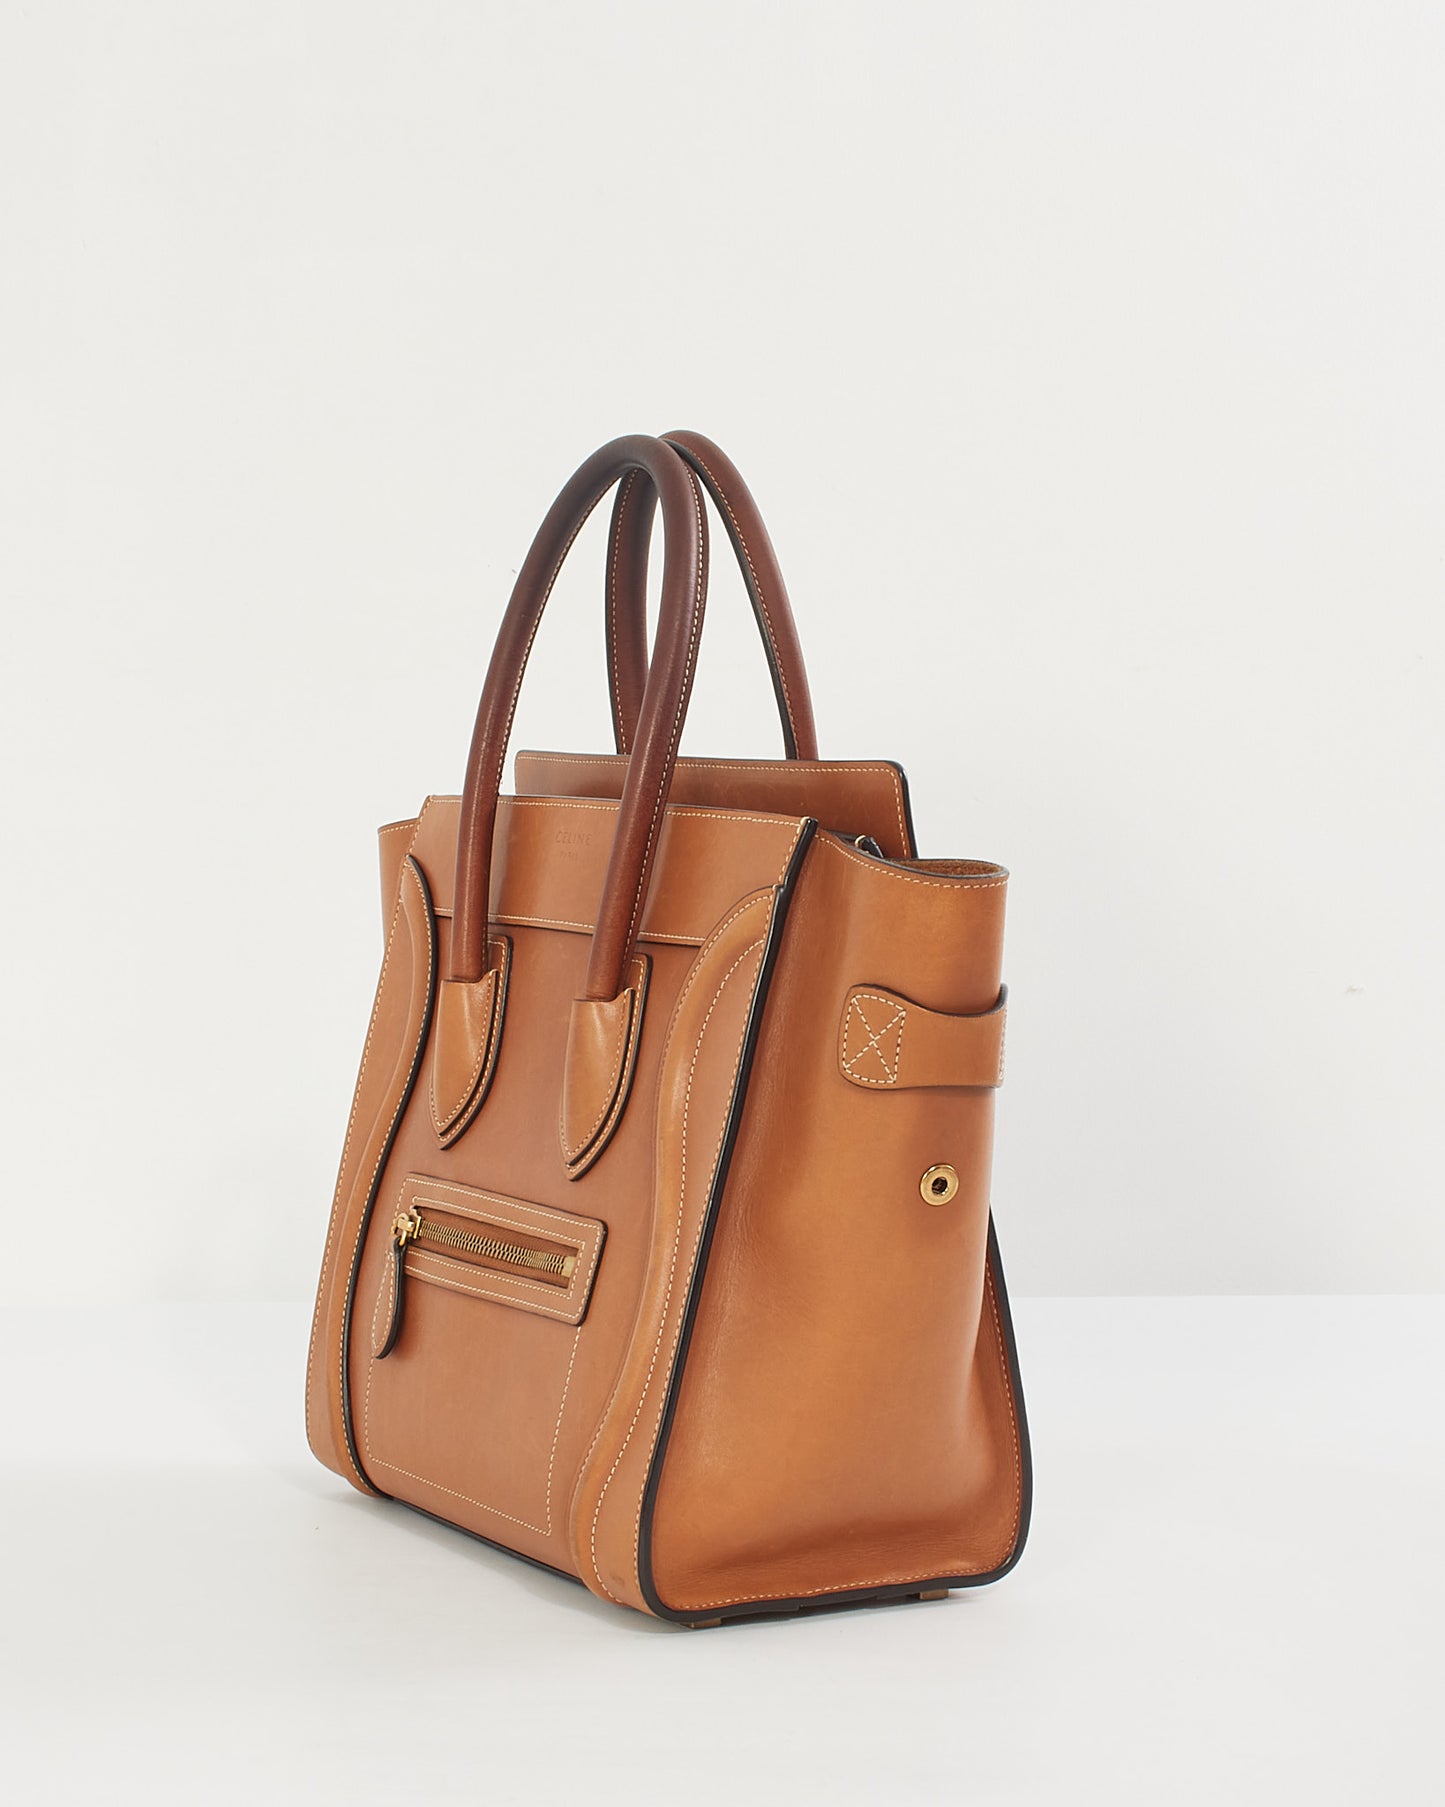 Celine Tan Smooth Leather Micro Luggage